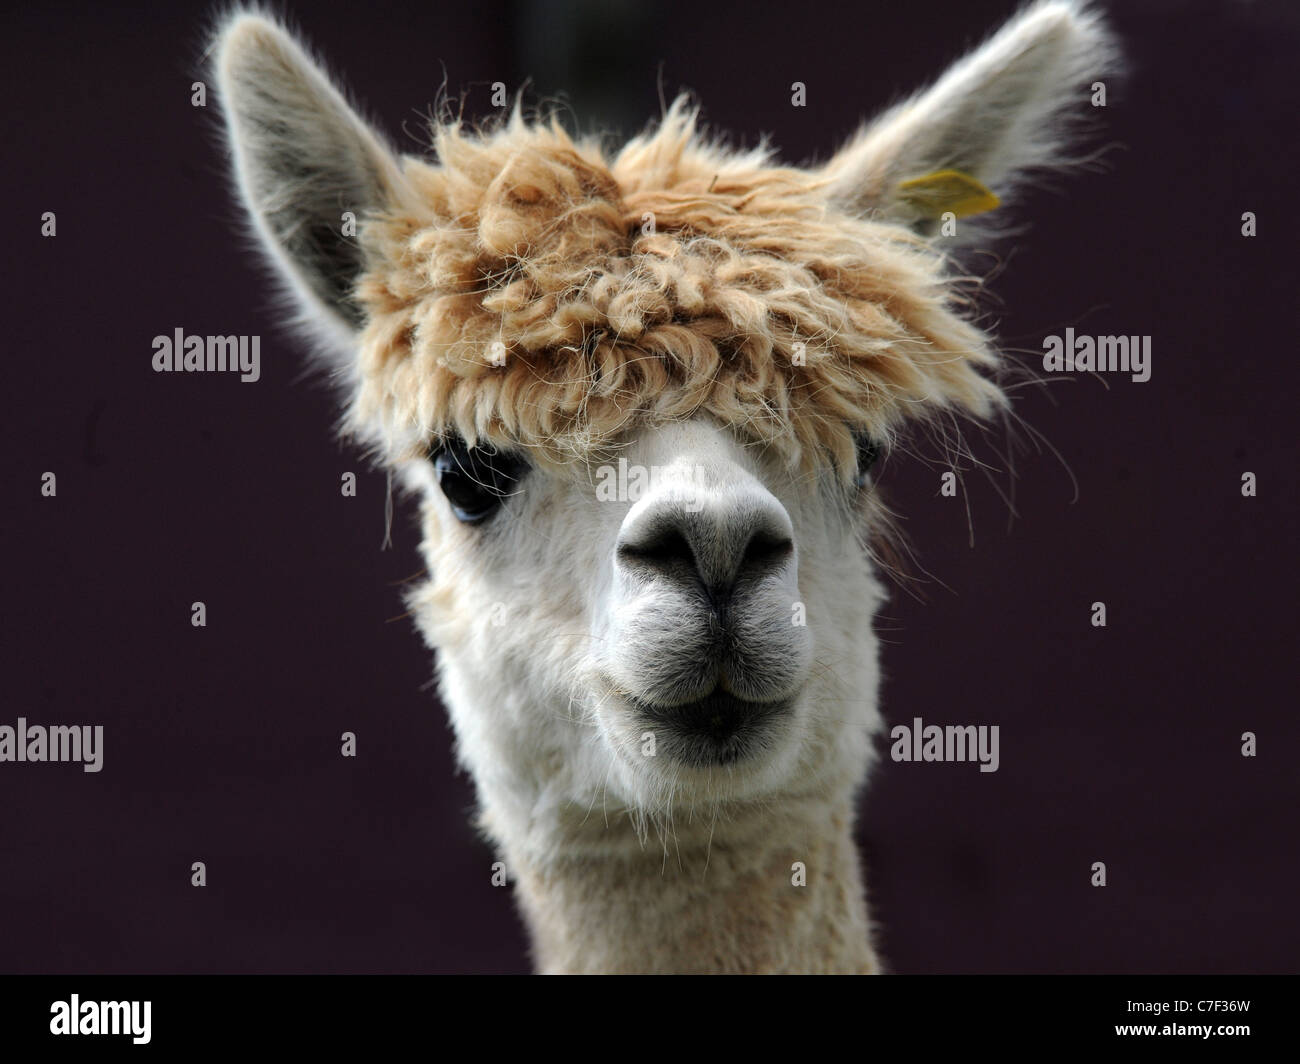 A portrait of an alpaca with a big fringe Stock Photo